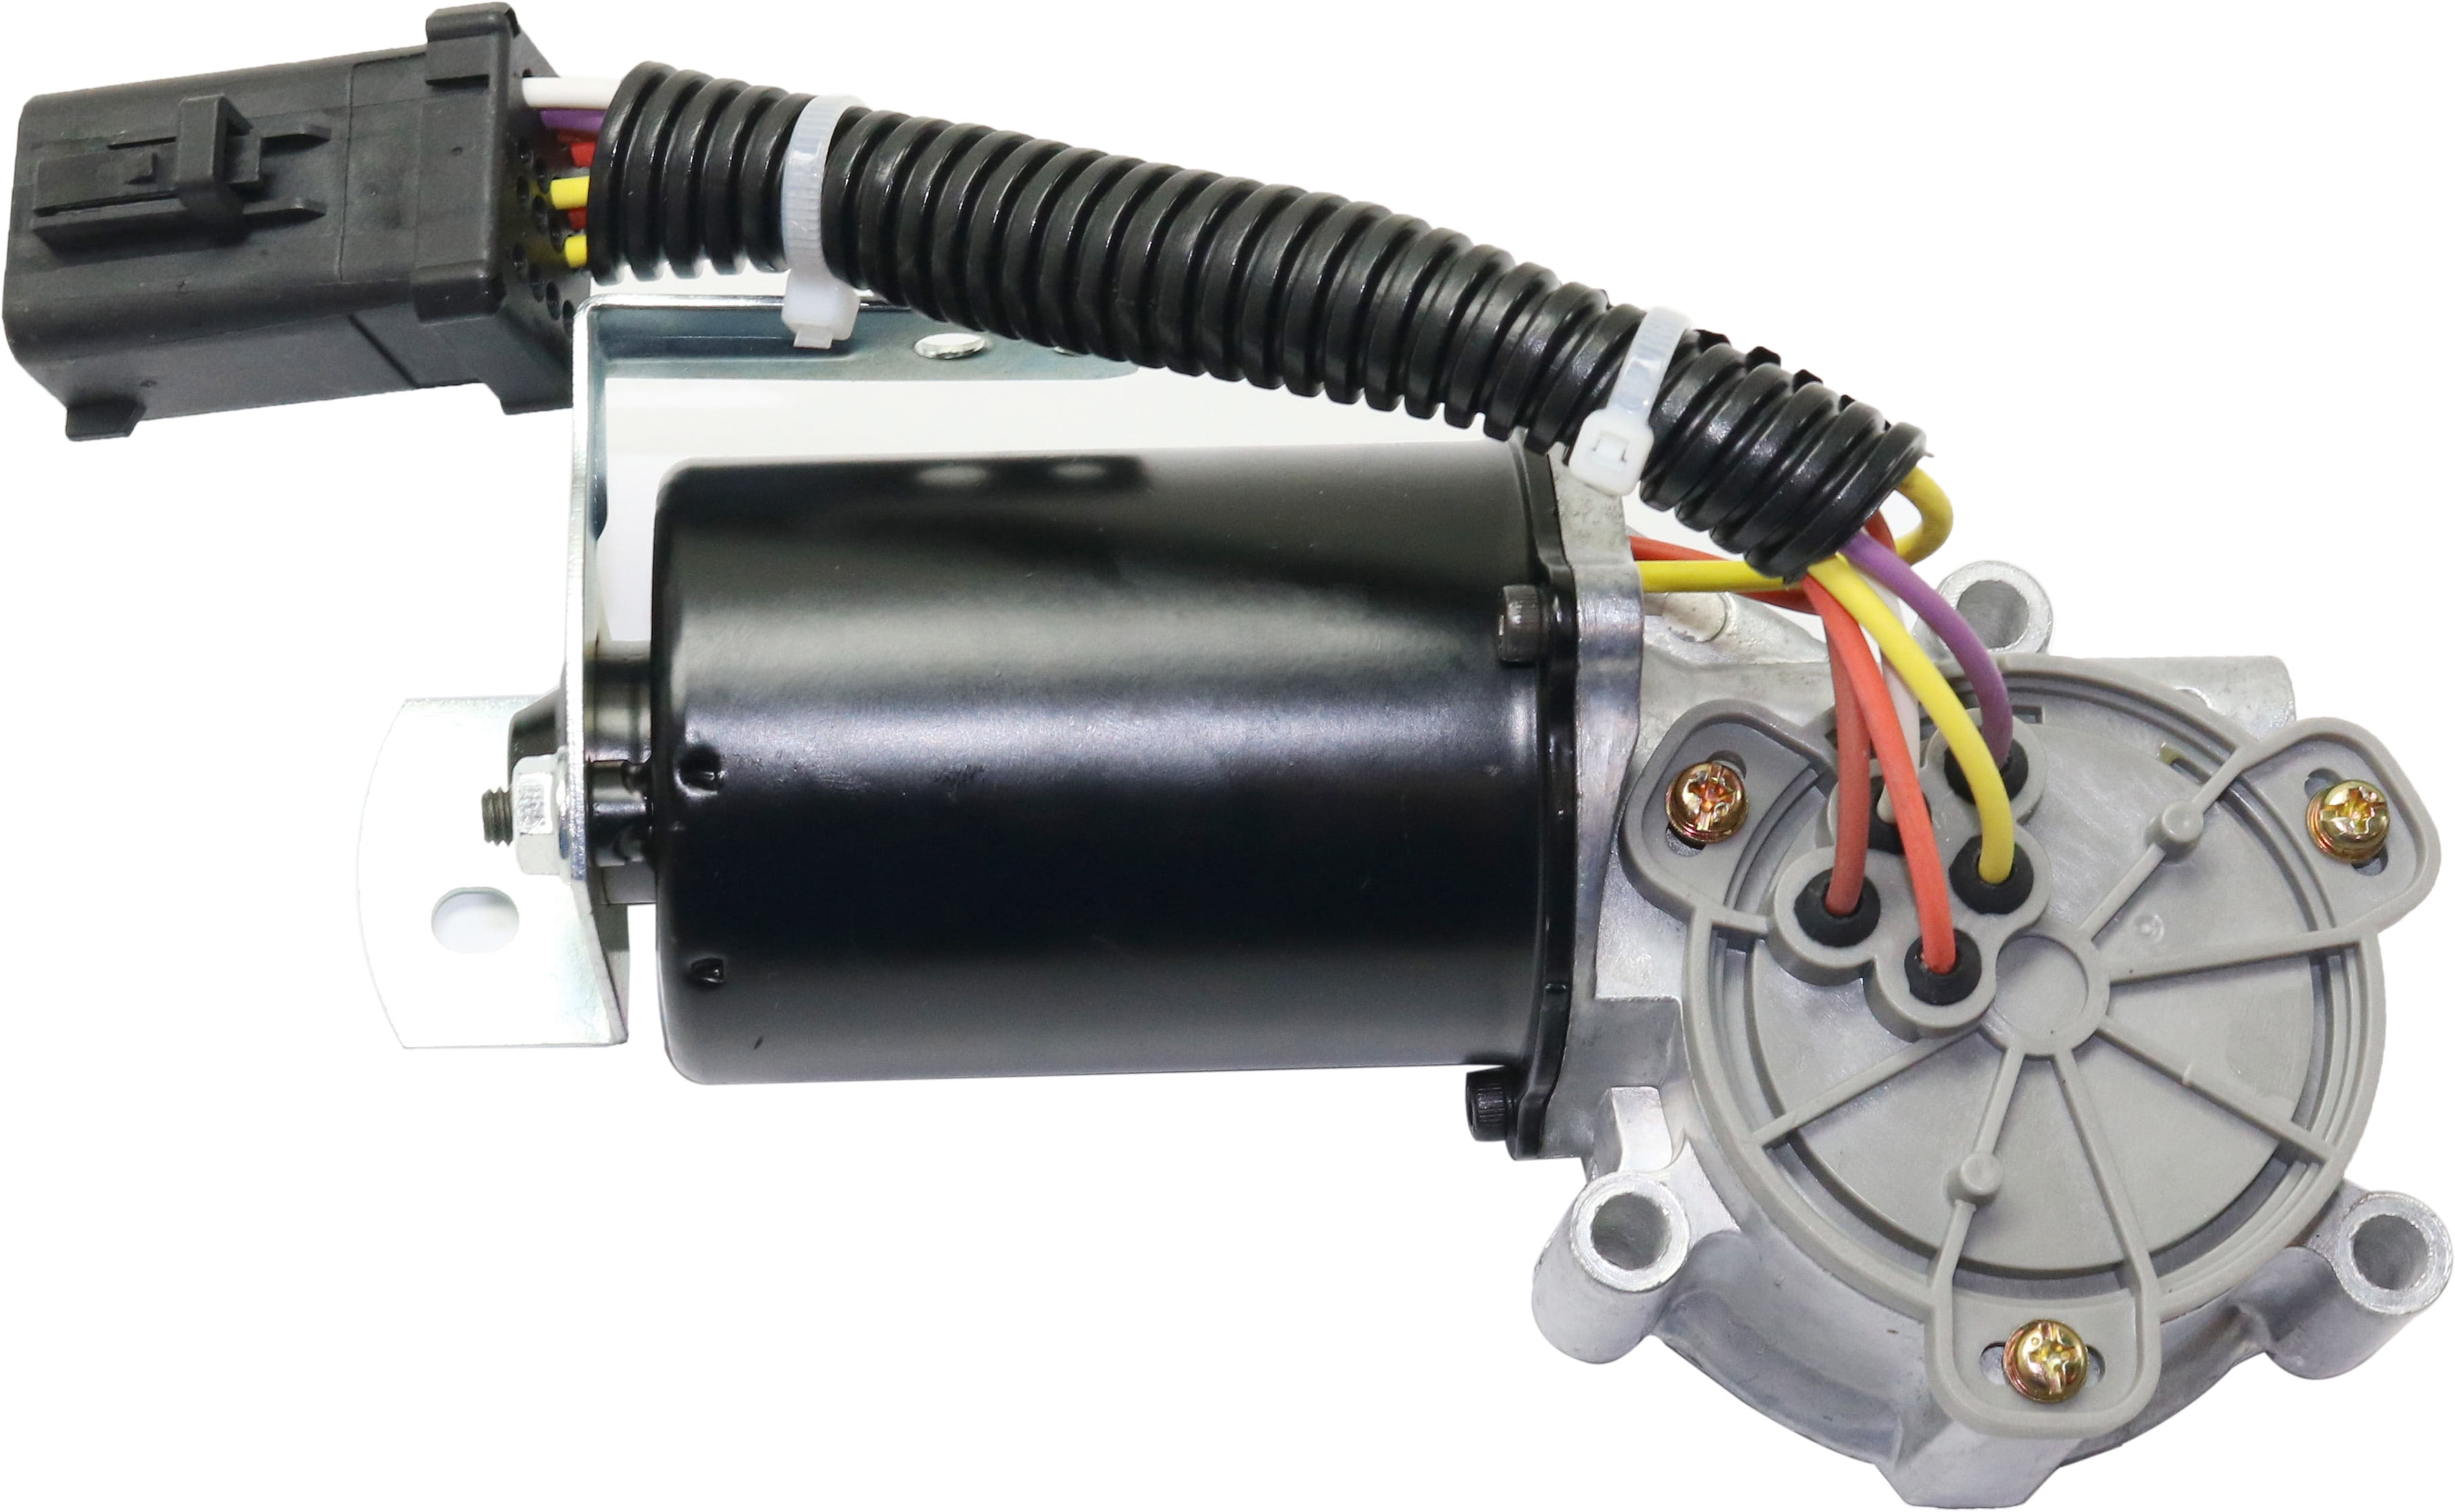 SCITOO 600-968 Transfer Case Shift Encoder Motor Fit for 2008-2011 for Ford Expedition 2009-2011 for Ford F-150 2008-2010 for Lincoln Navigator 